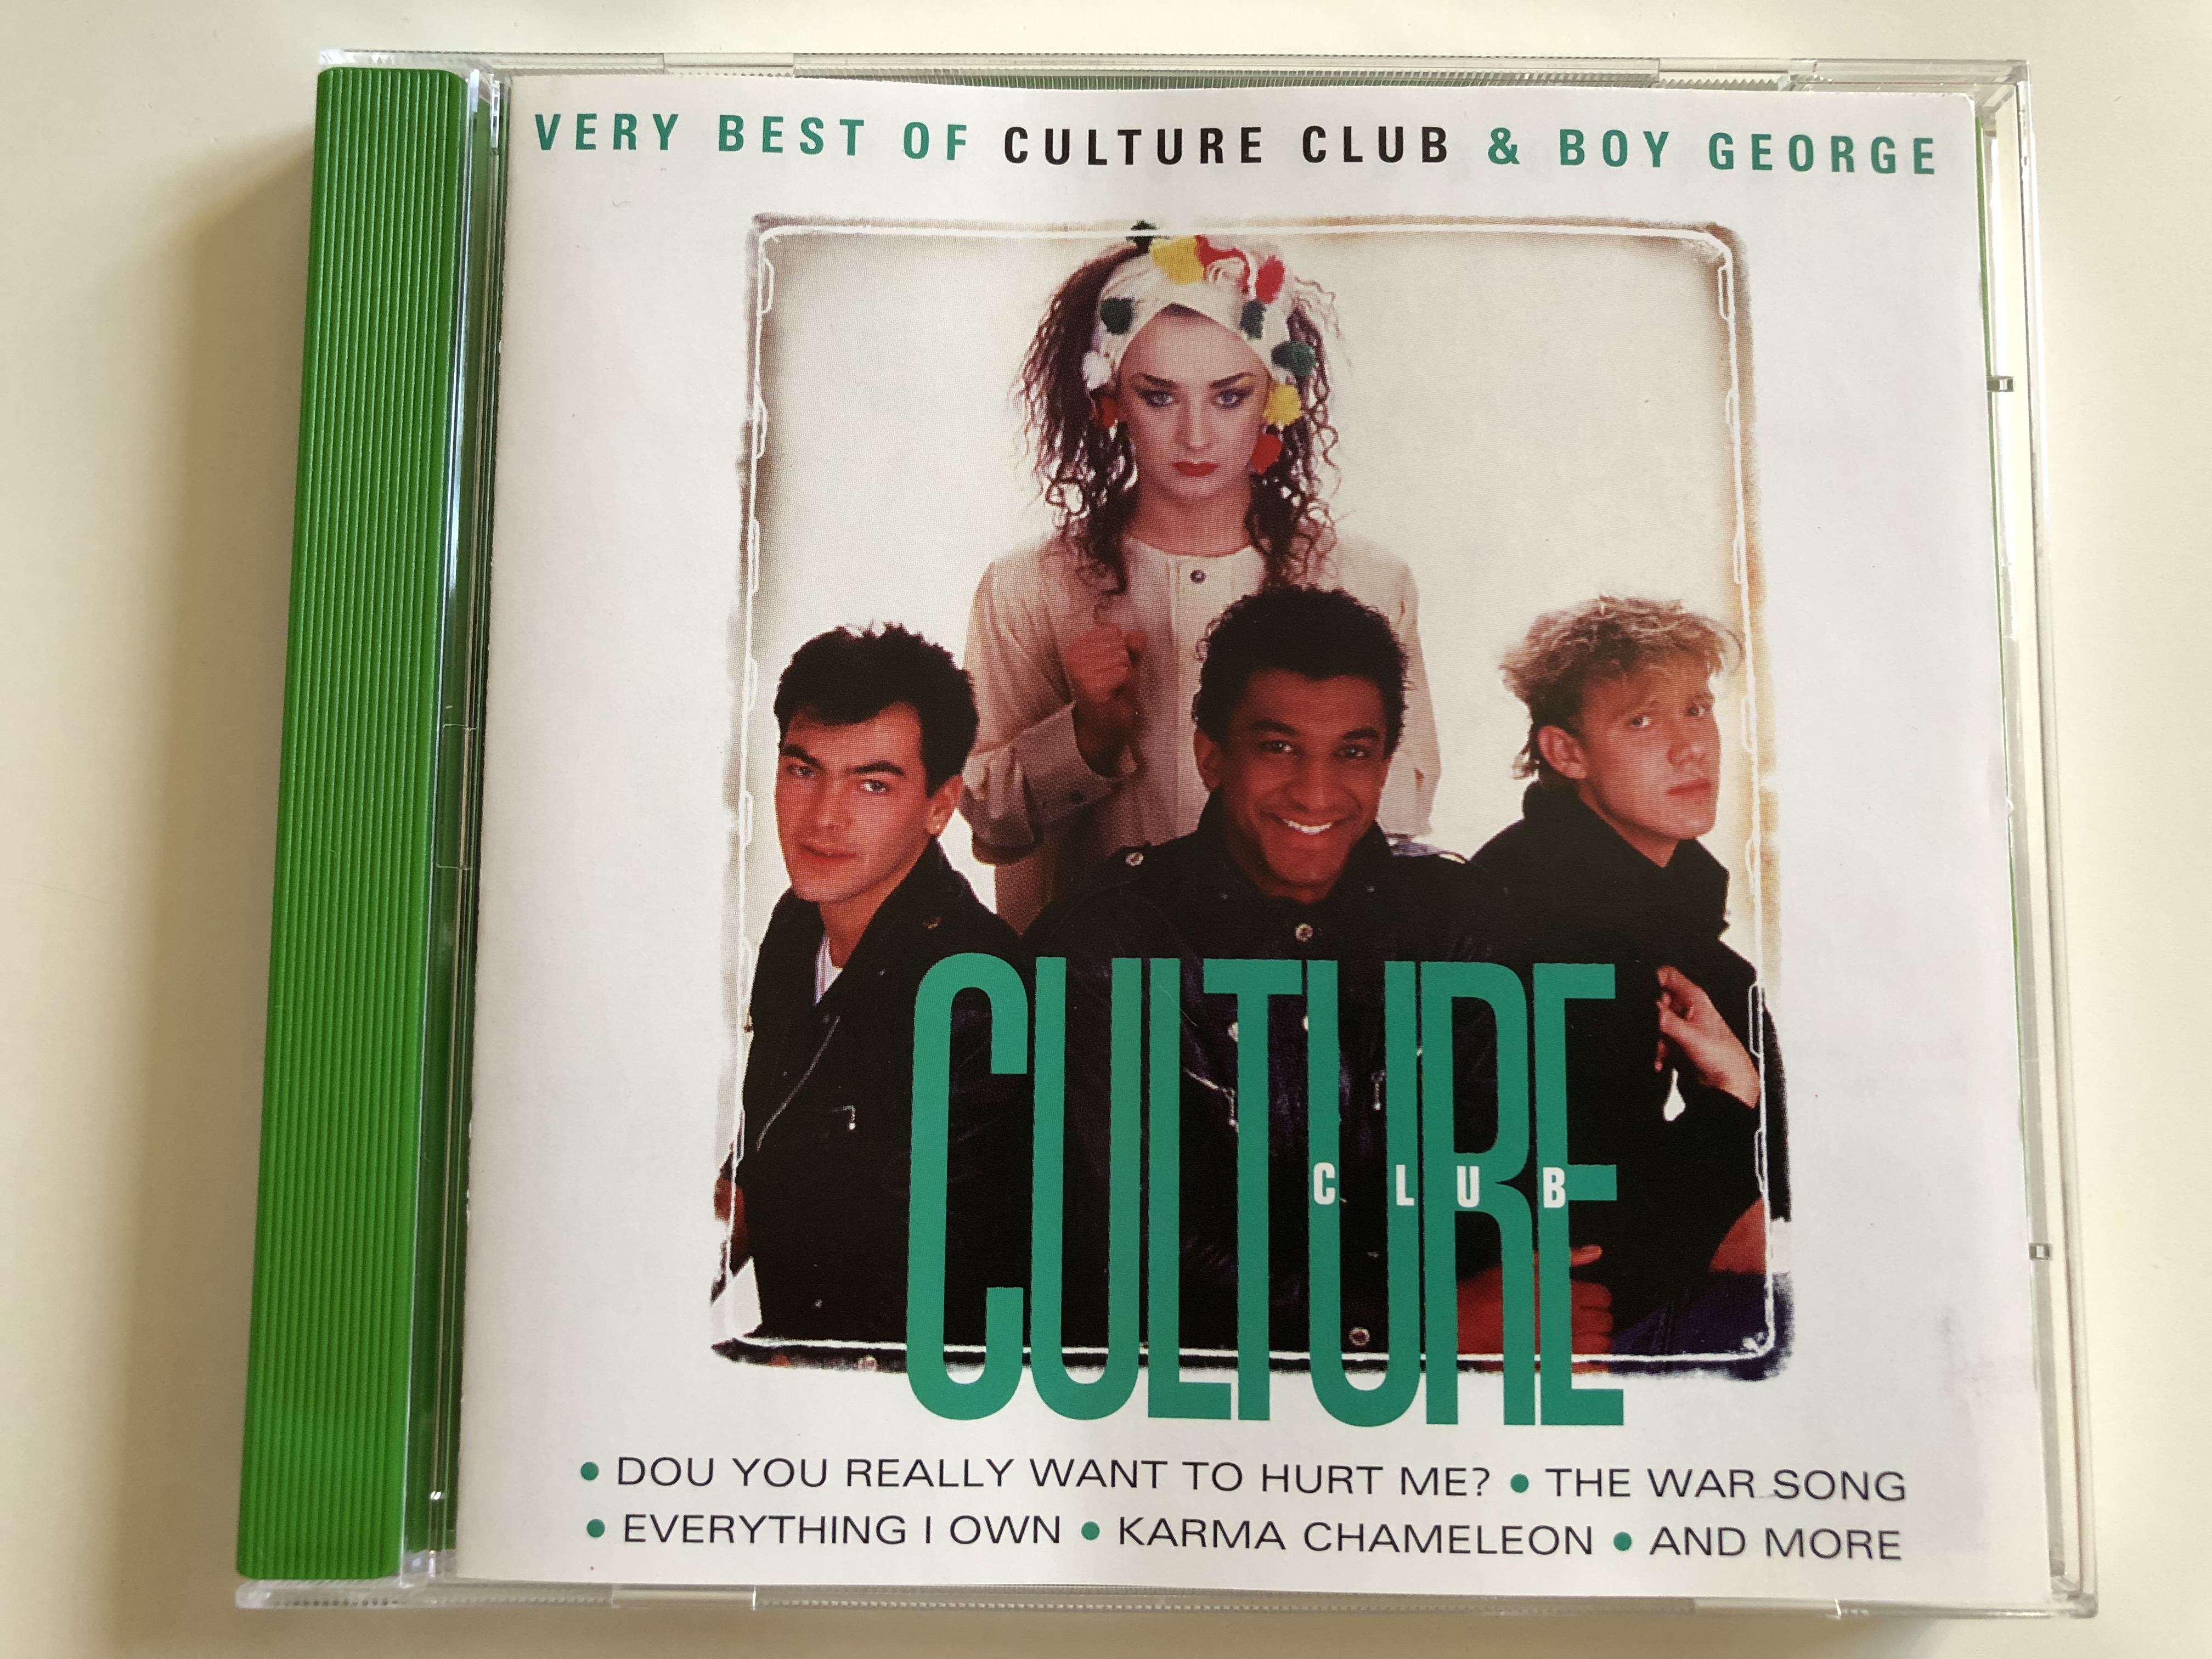 very-best-of-culture-club-boy-george-culture-club-do-you-really-want-to-hurt-me-the-war-song-everything-i-own-karma-chameleon-and-more-disky-audio-cd-1997-dc-886582-1-.jpg